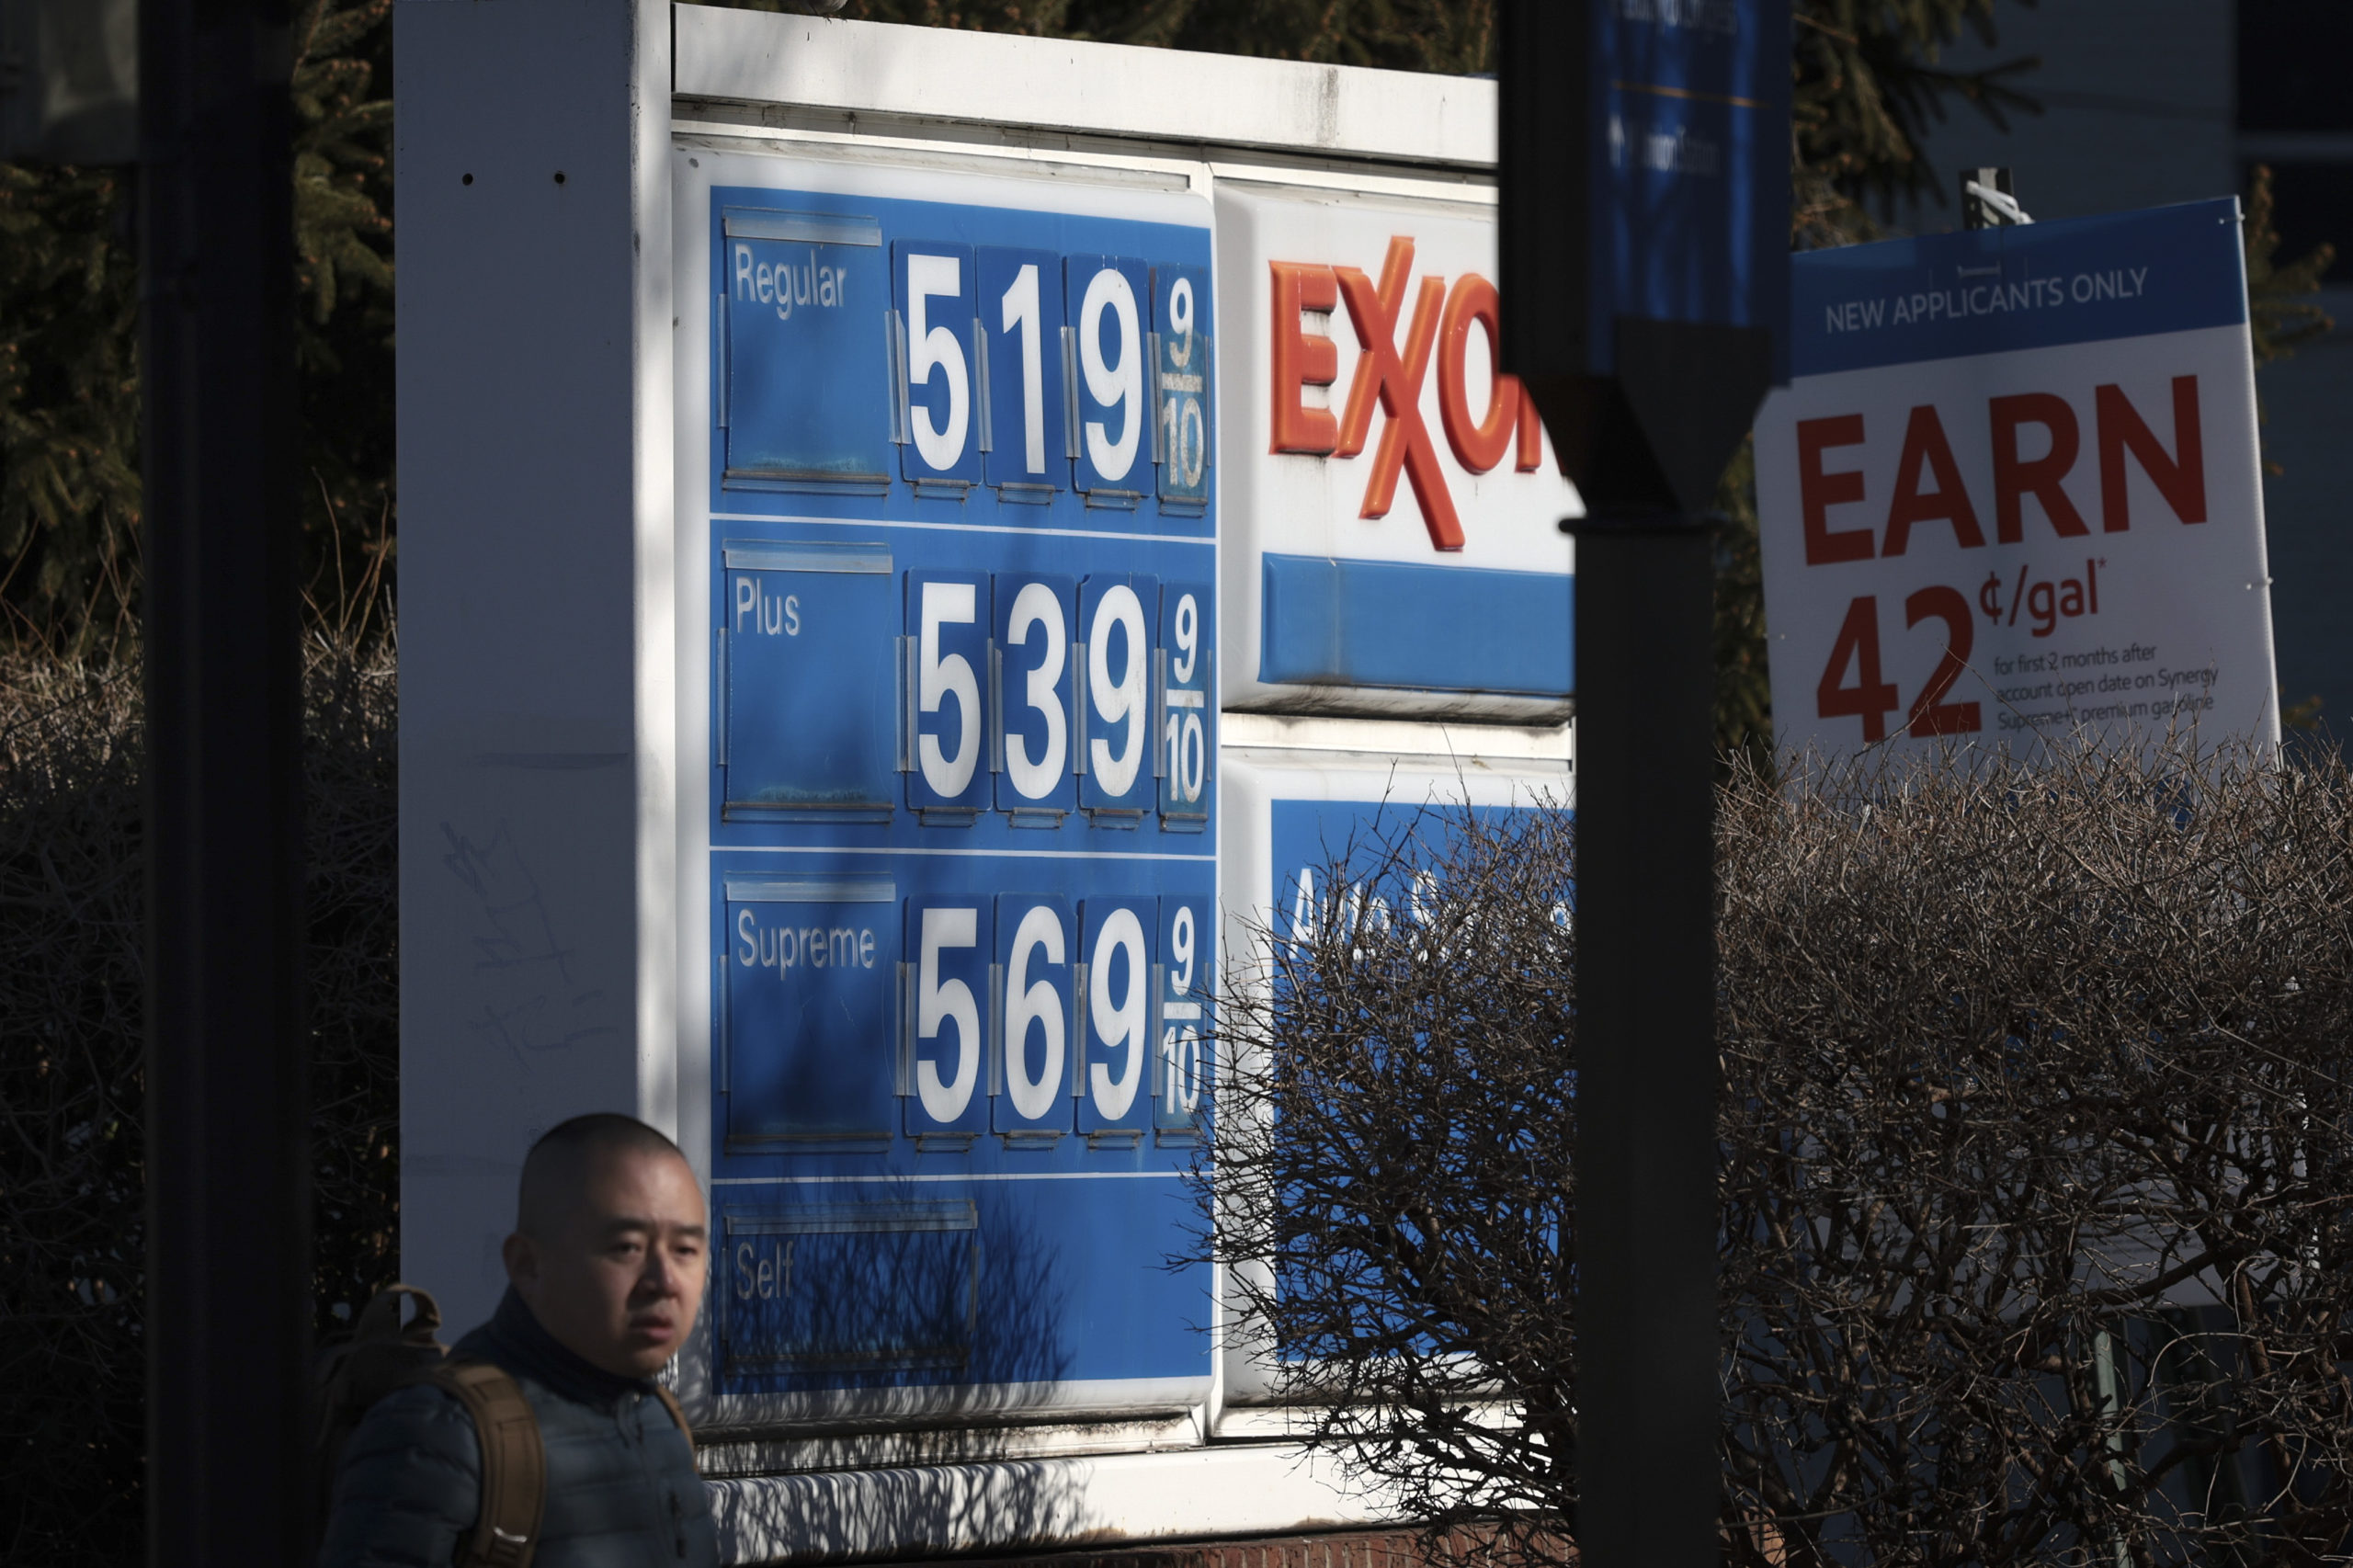 Prices at an Exxon gas station in Washington, D.C. are pictured in March. (Win McNamee/Getty Images)